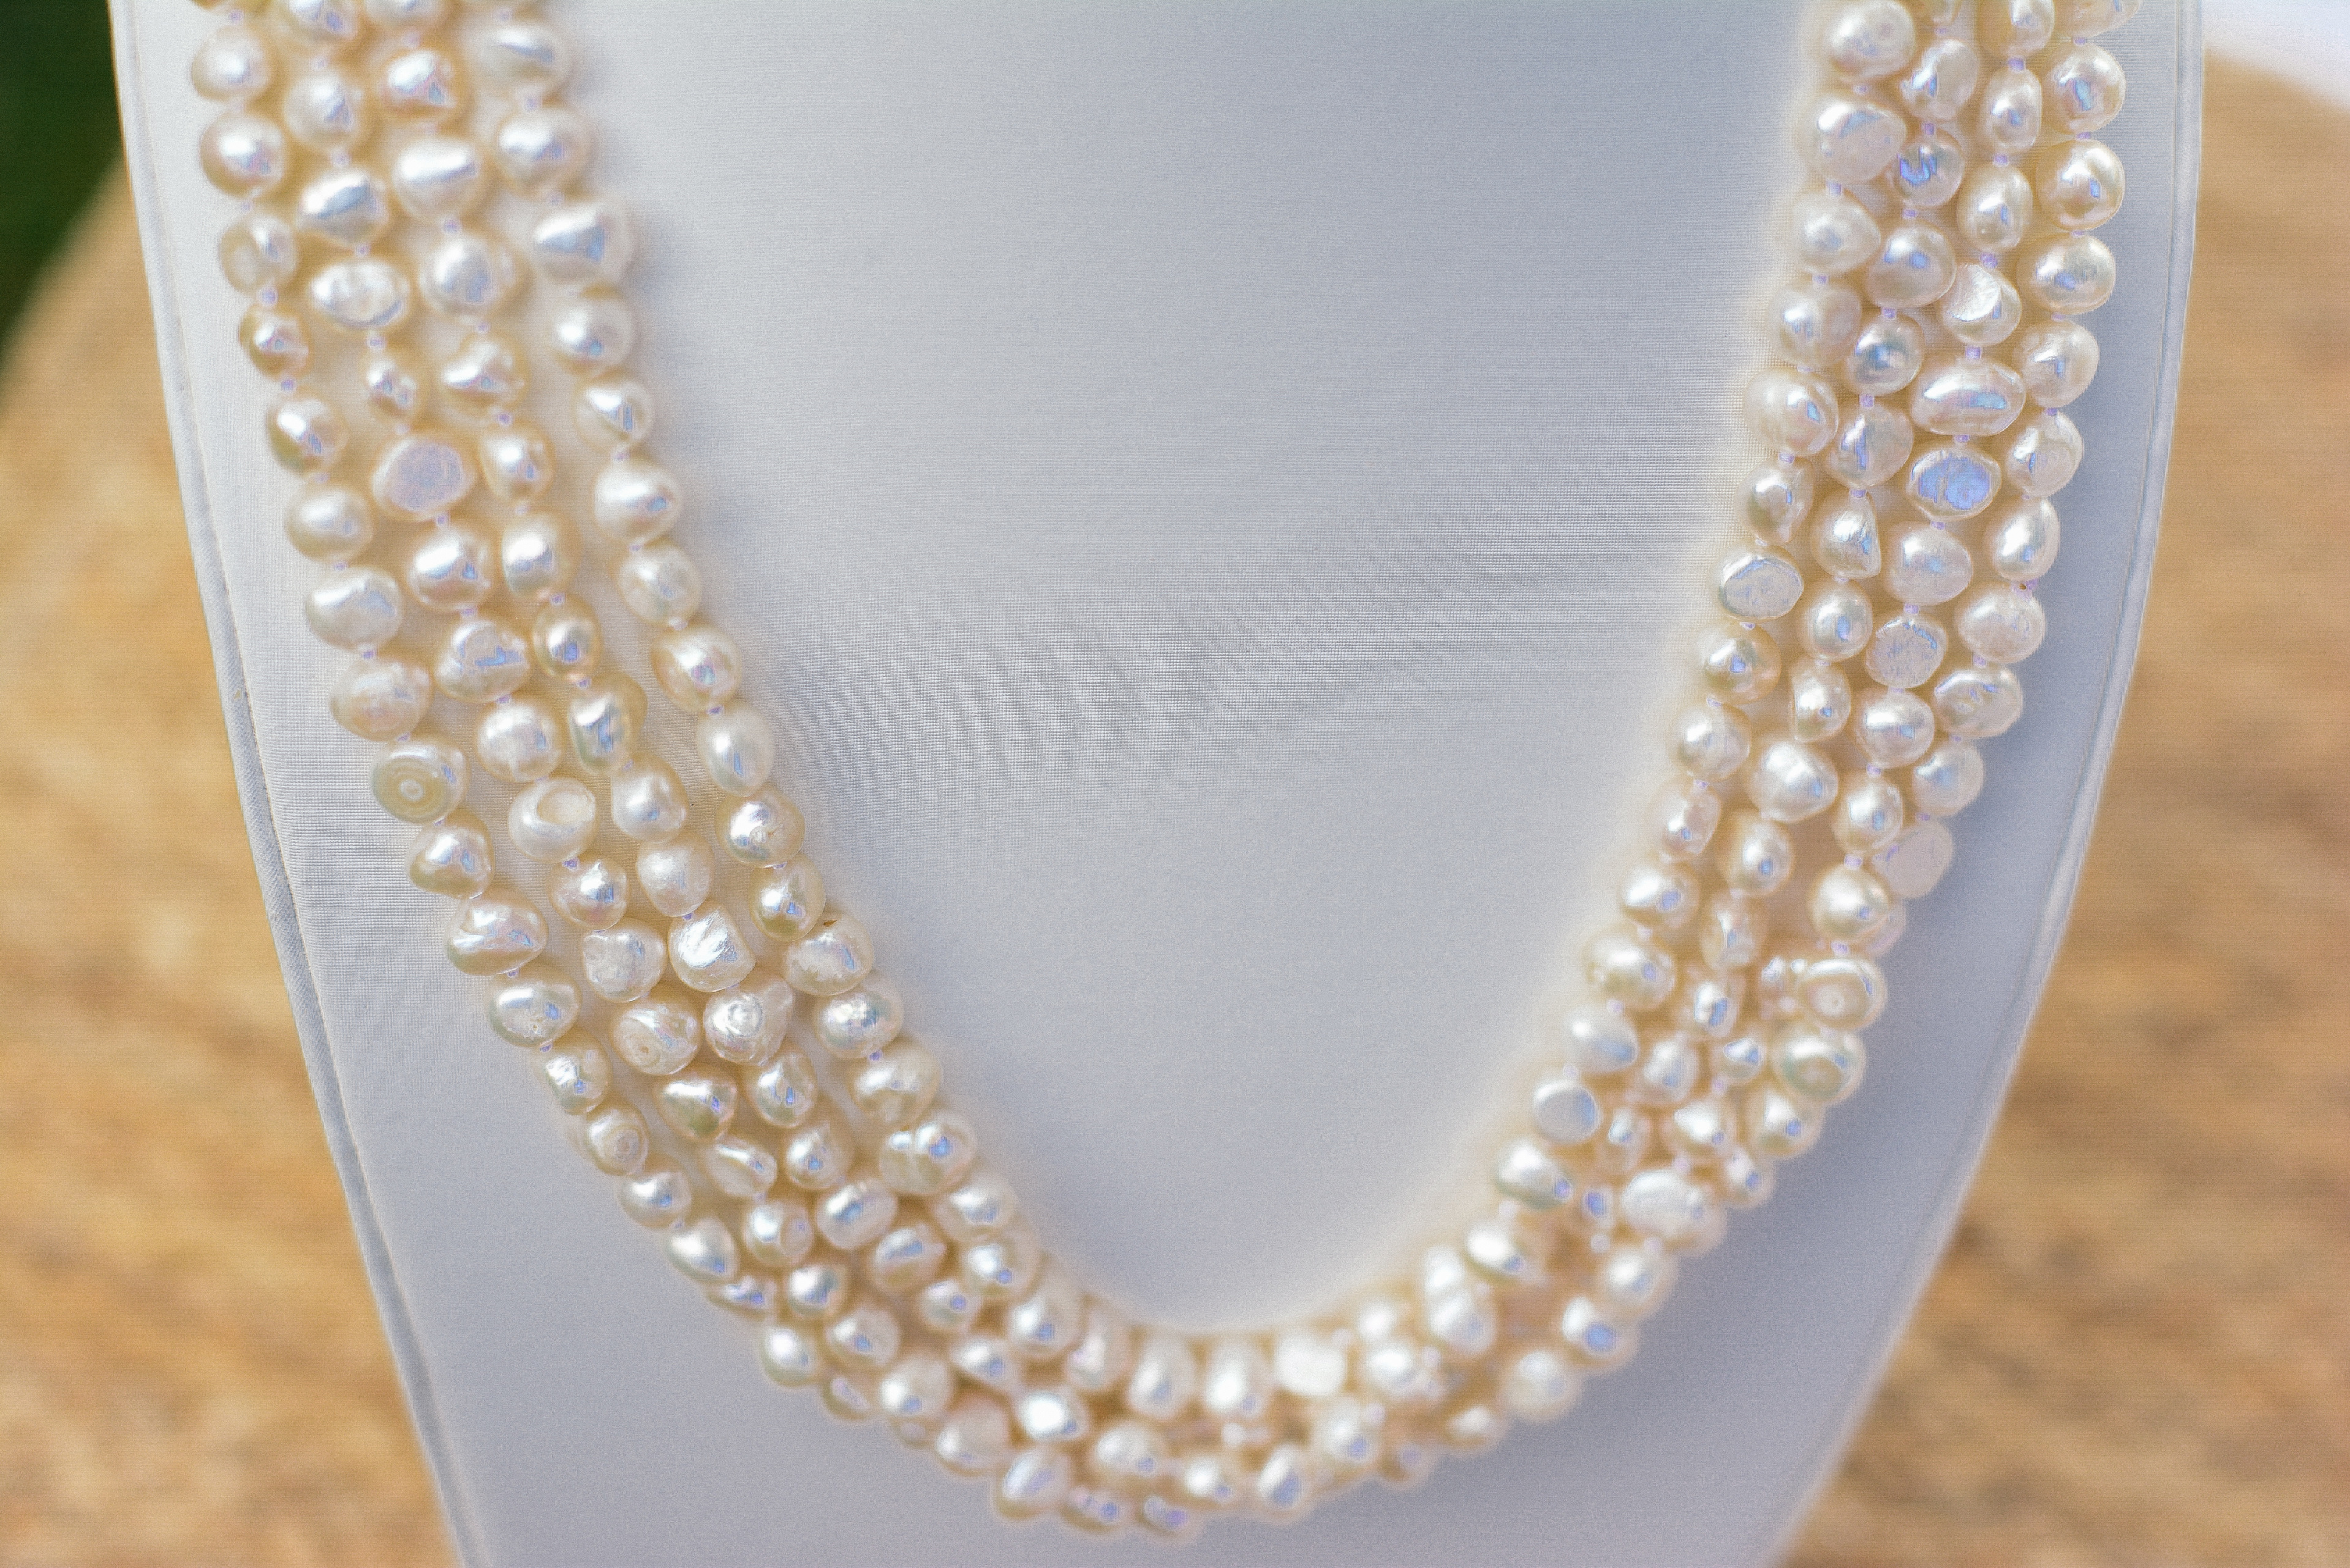 Doubled Ropes of Freshwater Pearls Necklace - 2 Color Choices